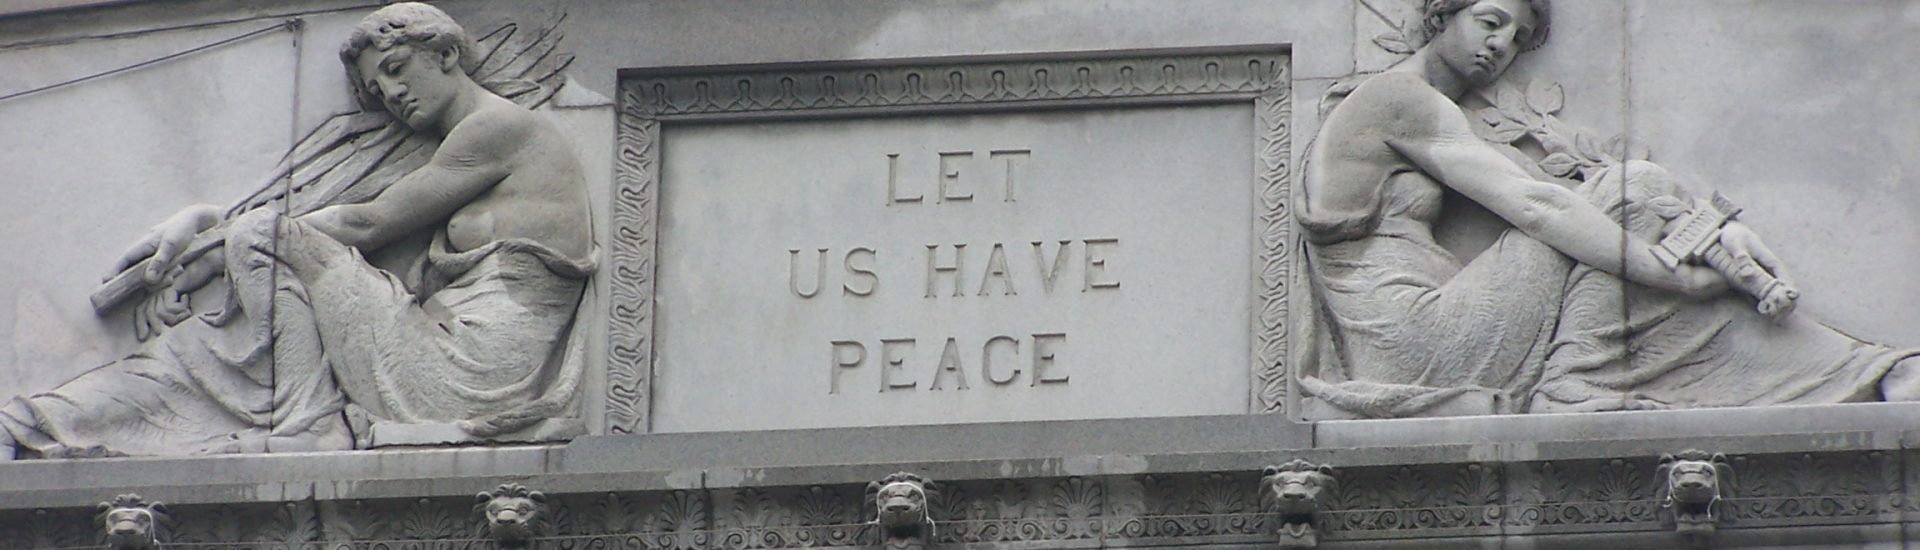 Grant Let Us Have Peace